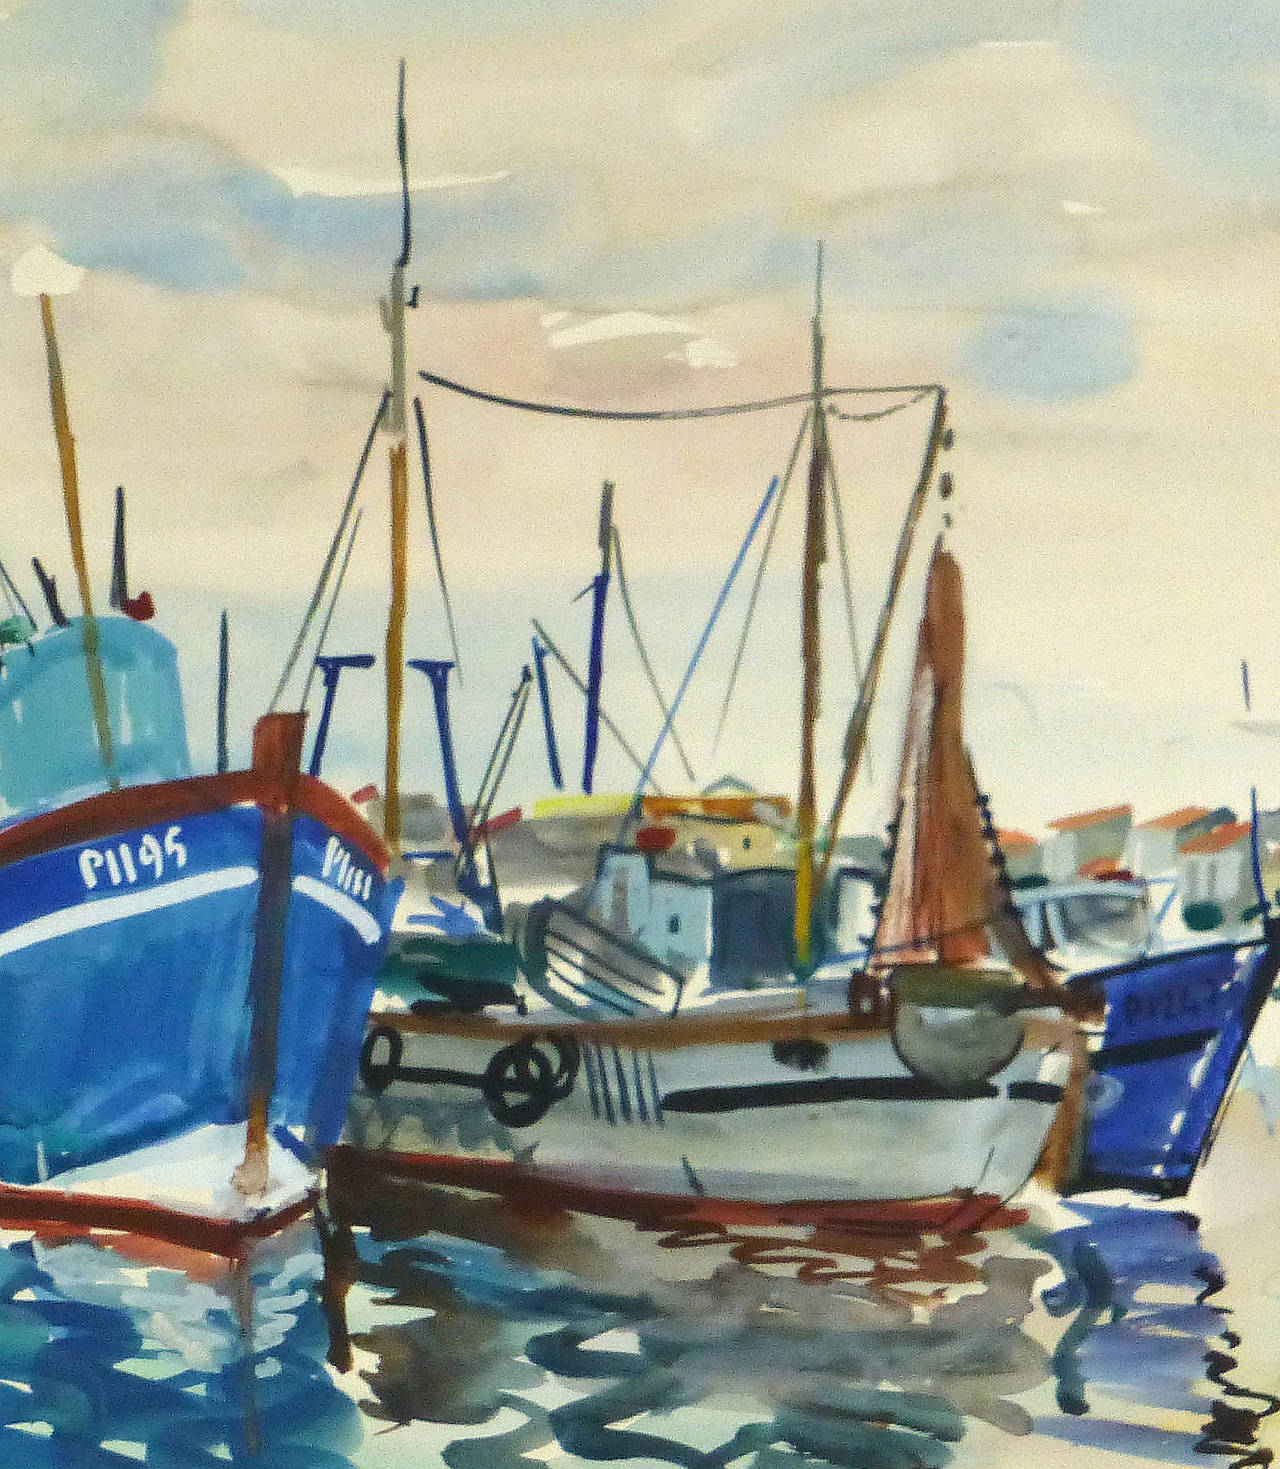 Vintage French Watercolor Seascape - Harbor Reflections - Art by Stephane Magnard